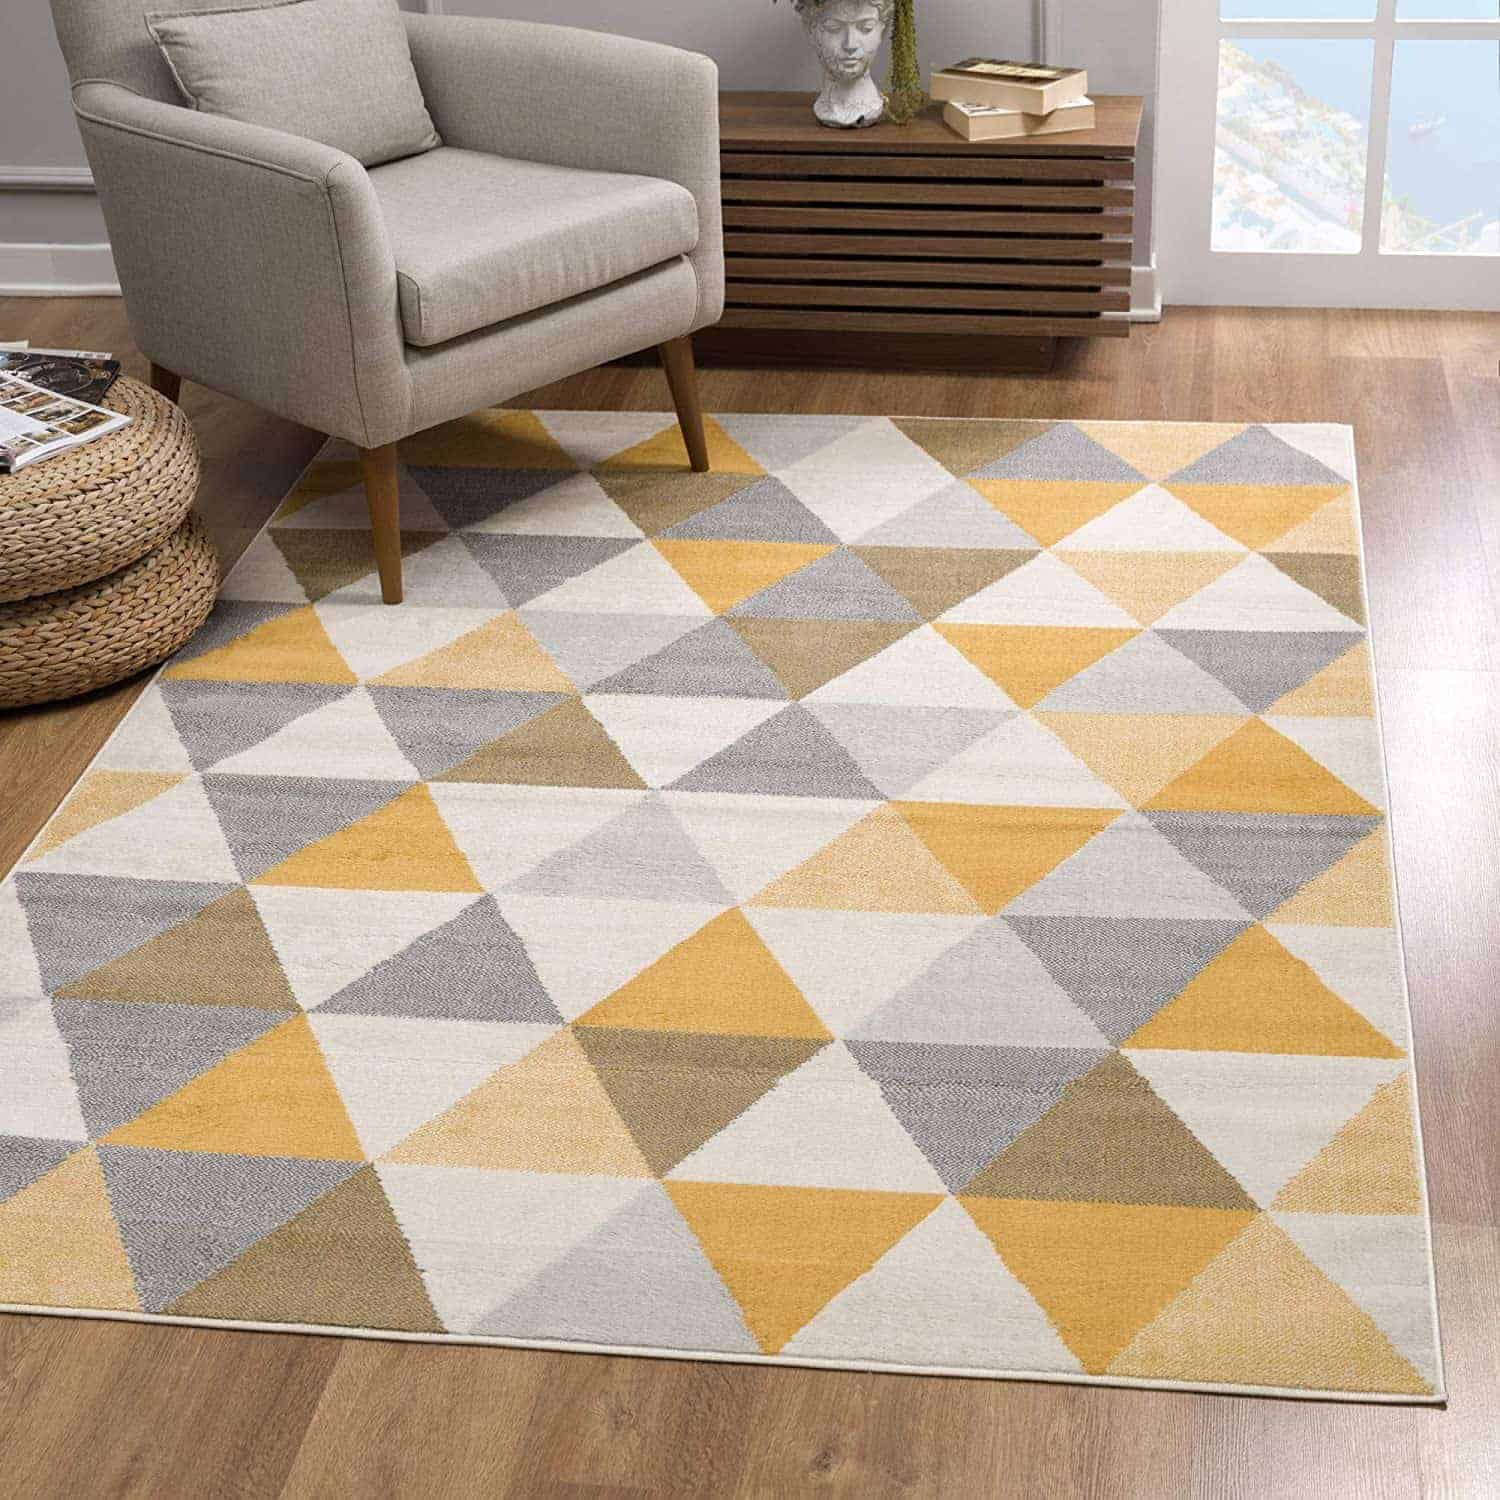 geometrical pattern rug in yellow, gray and white colours